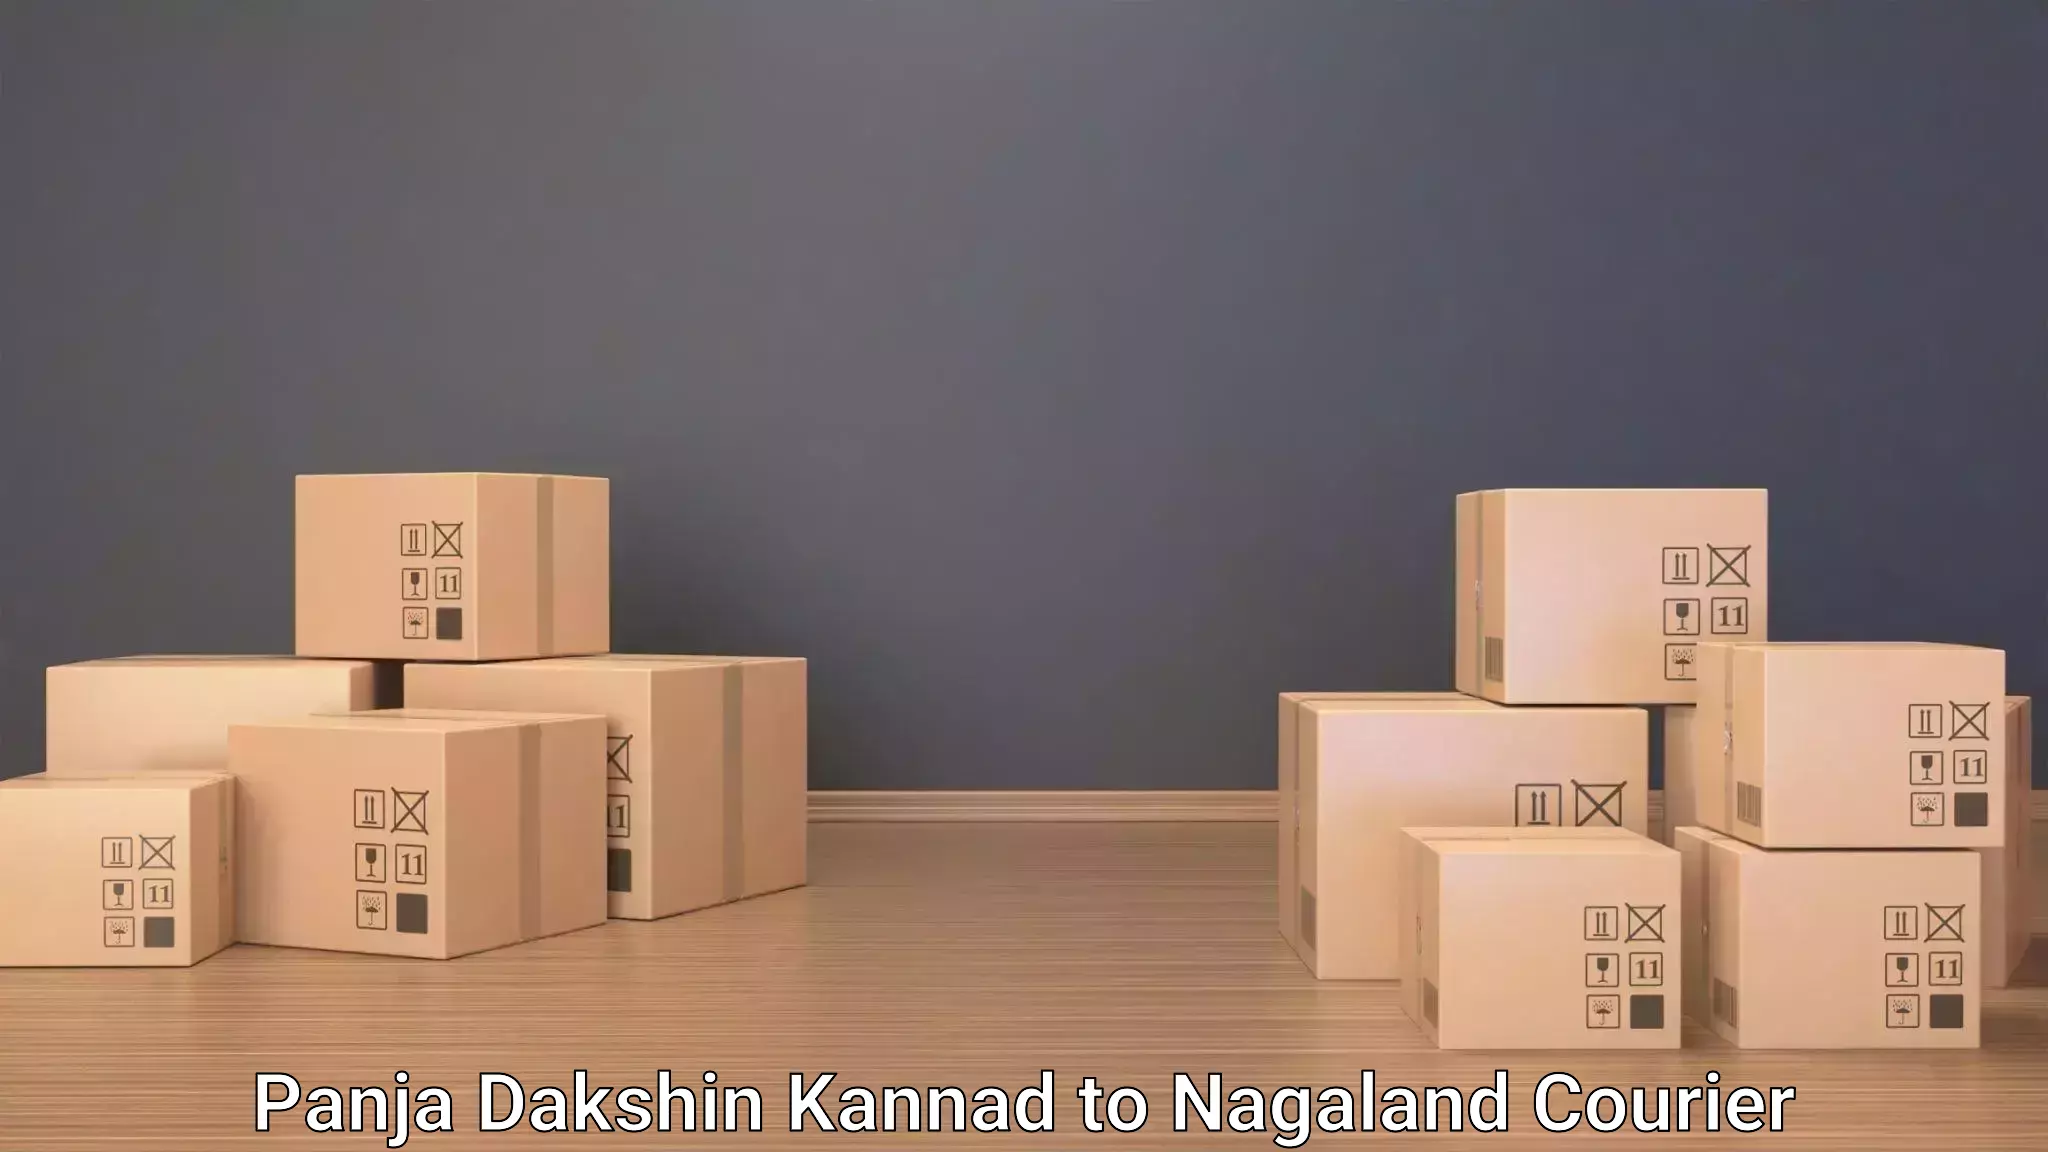 Personal luggage delivery in Panja Dakshin Kannad to Nagaland